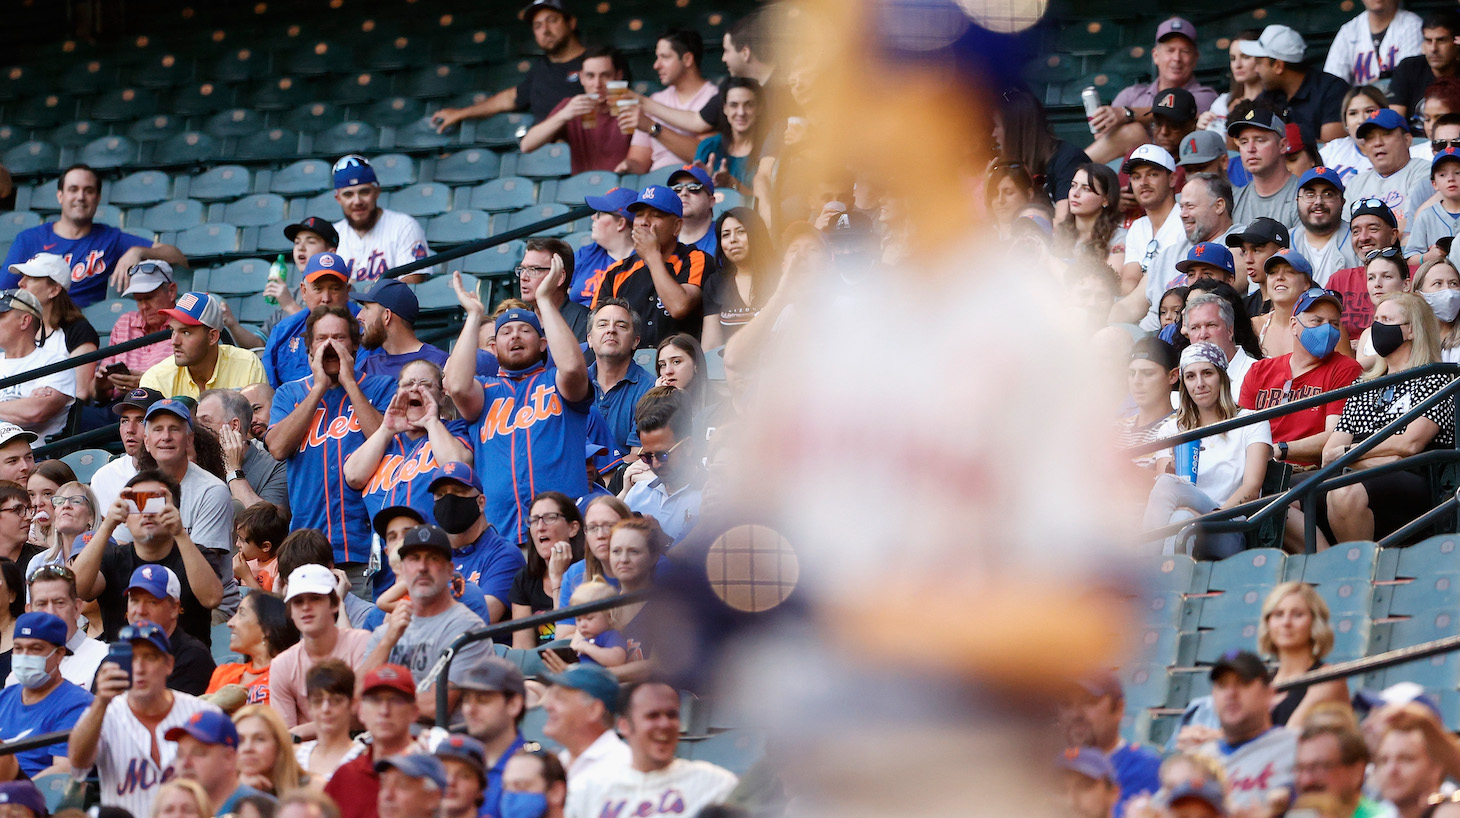 PHOENIX, ARIZONA - MAY 31: Fans of the New York Mets cheer as Jacob deGrom #48 bats against the Arizona Diamondbacks during the third inning of the MLB game at Chase Field on May 31, 2021 in Phoenix, Arizona. (Photo by Christian Petersen/Getty Images)